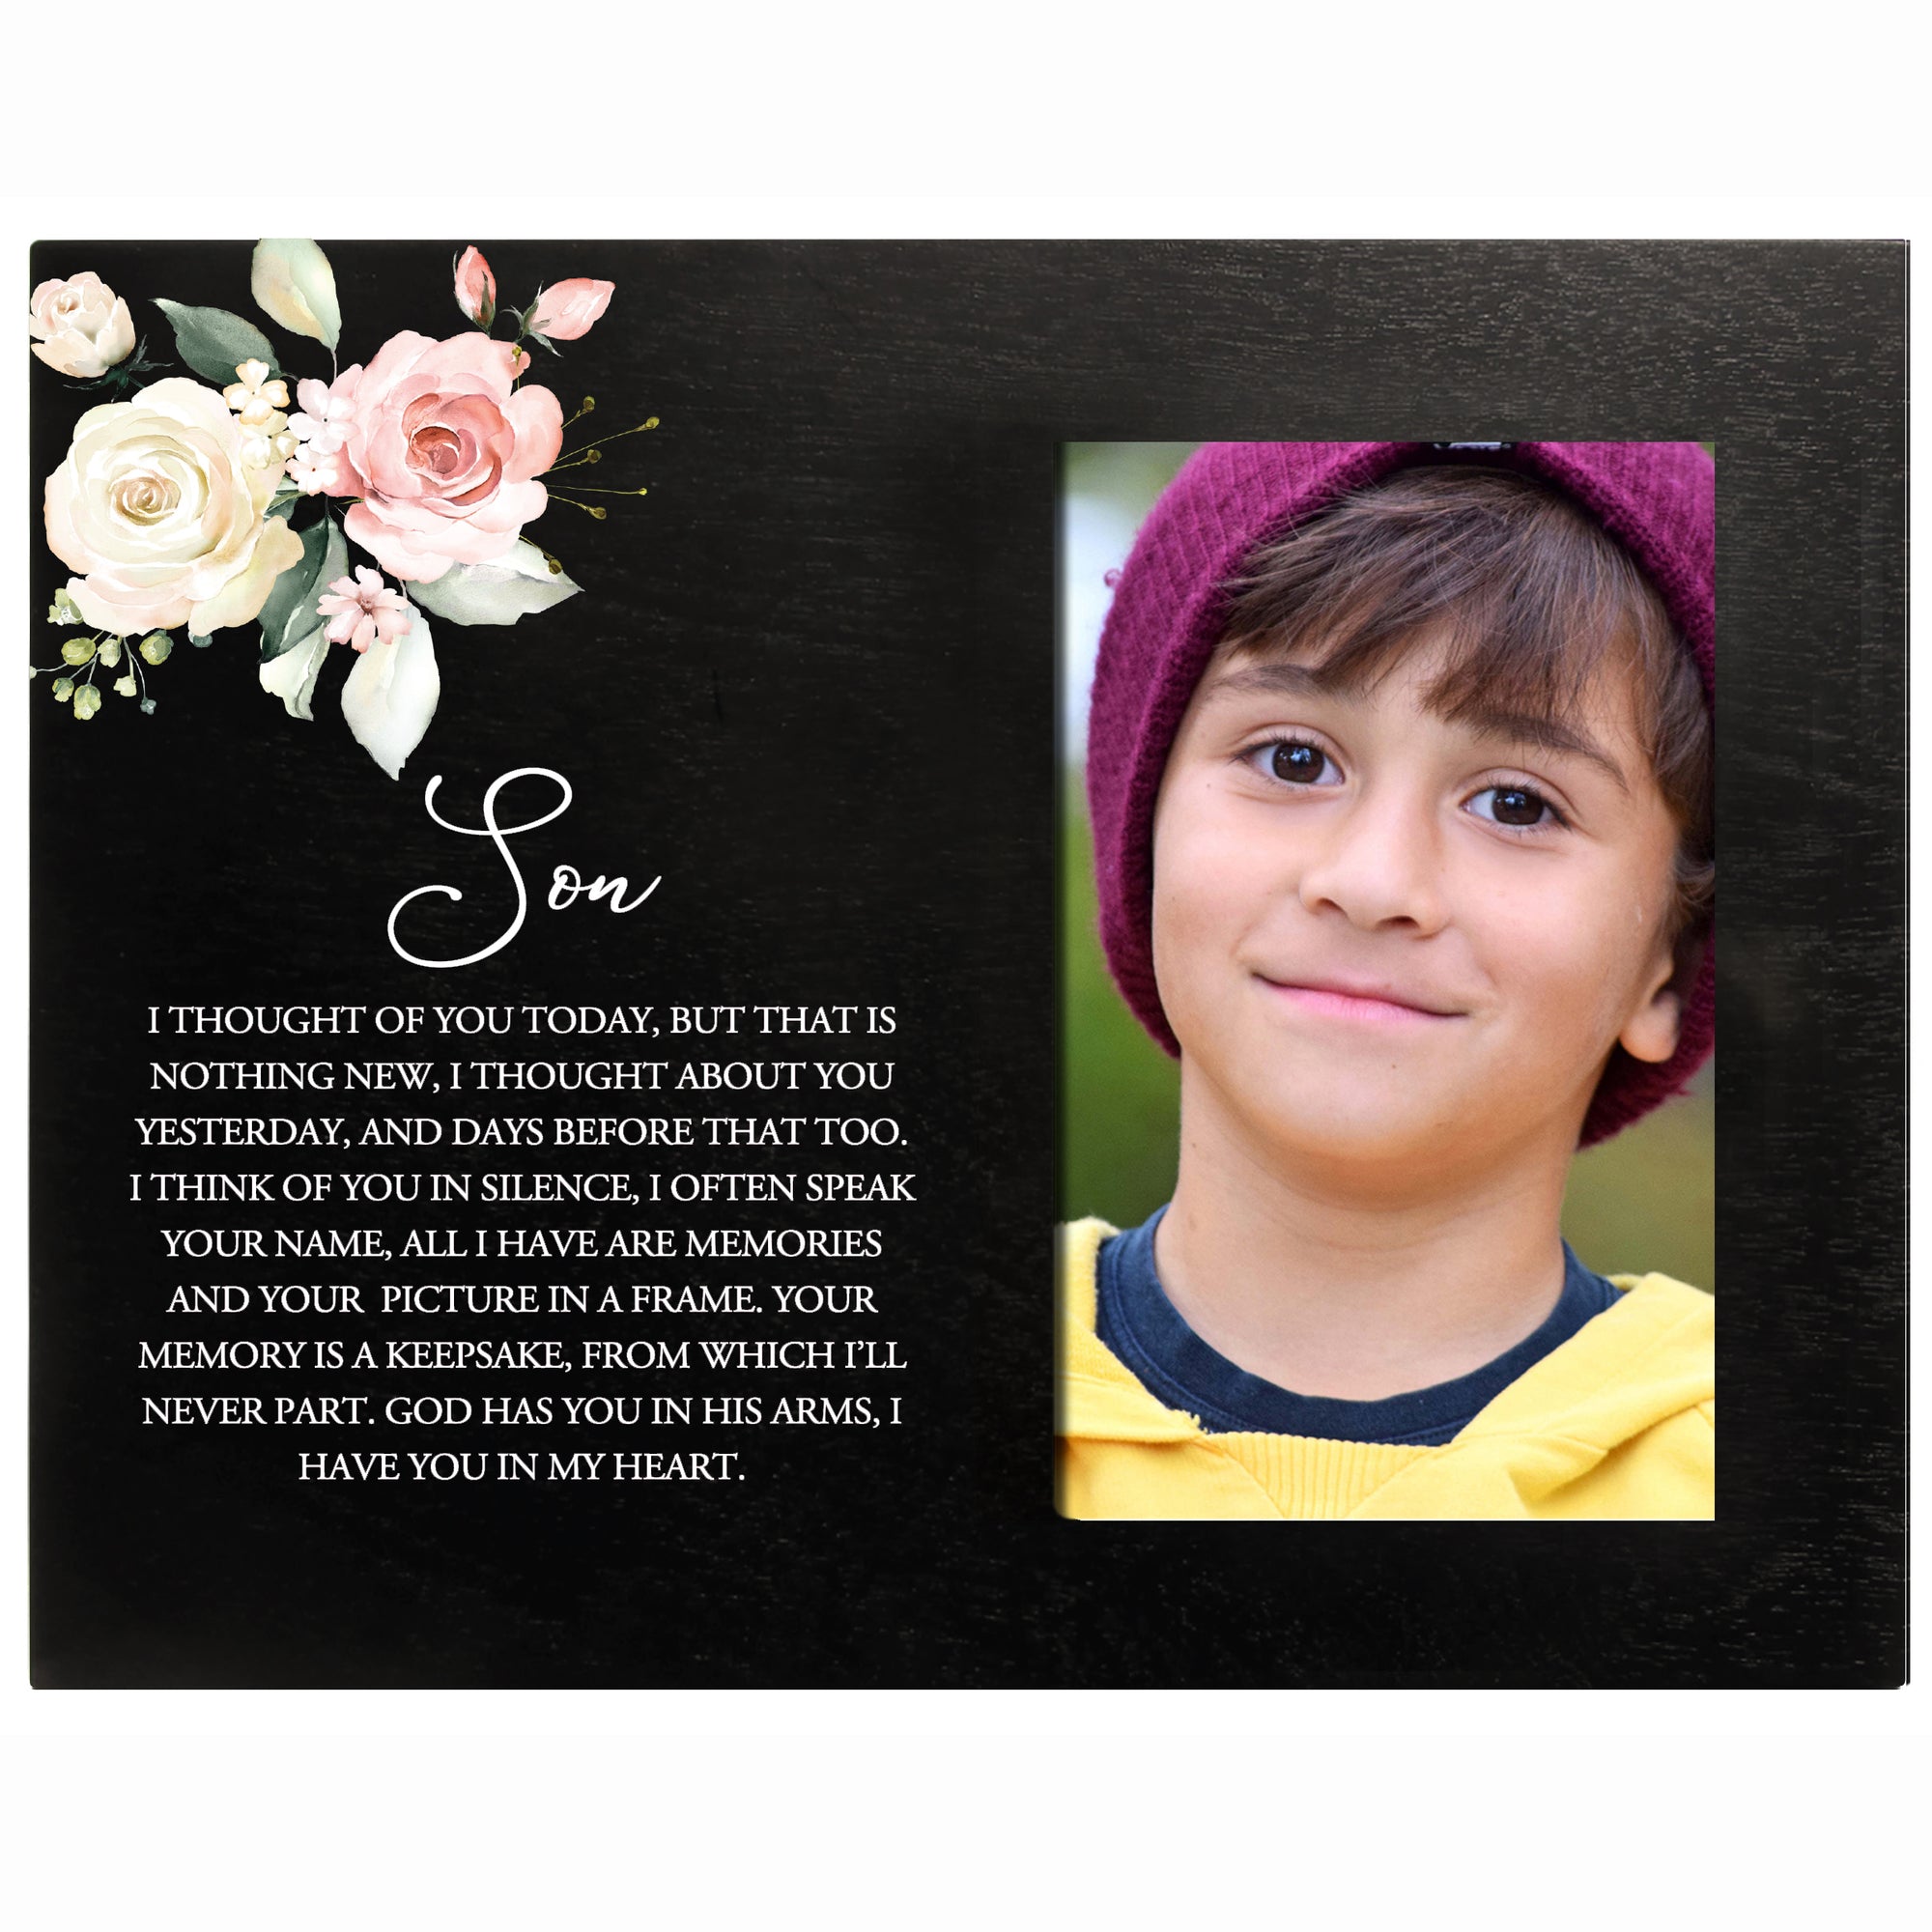 Sentimental Human Memorial Photo Frame Gift Bereavement Gift Idea - Son I thought of you